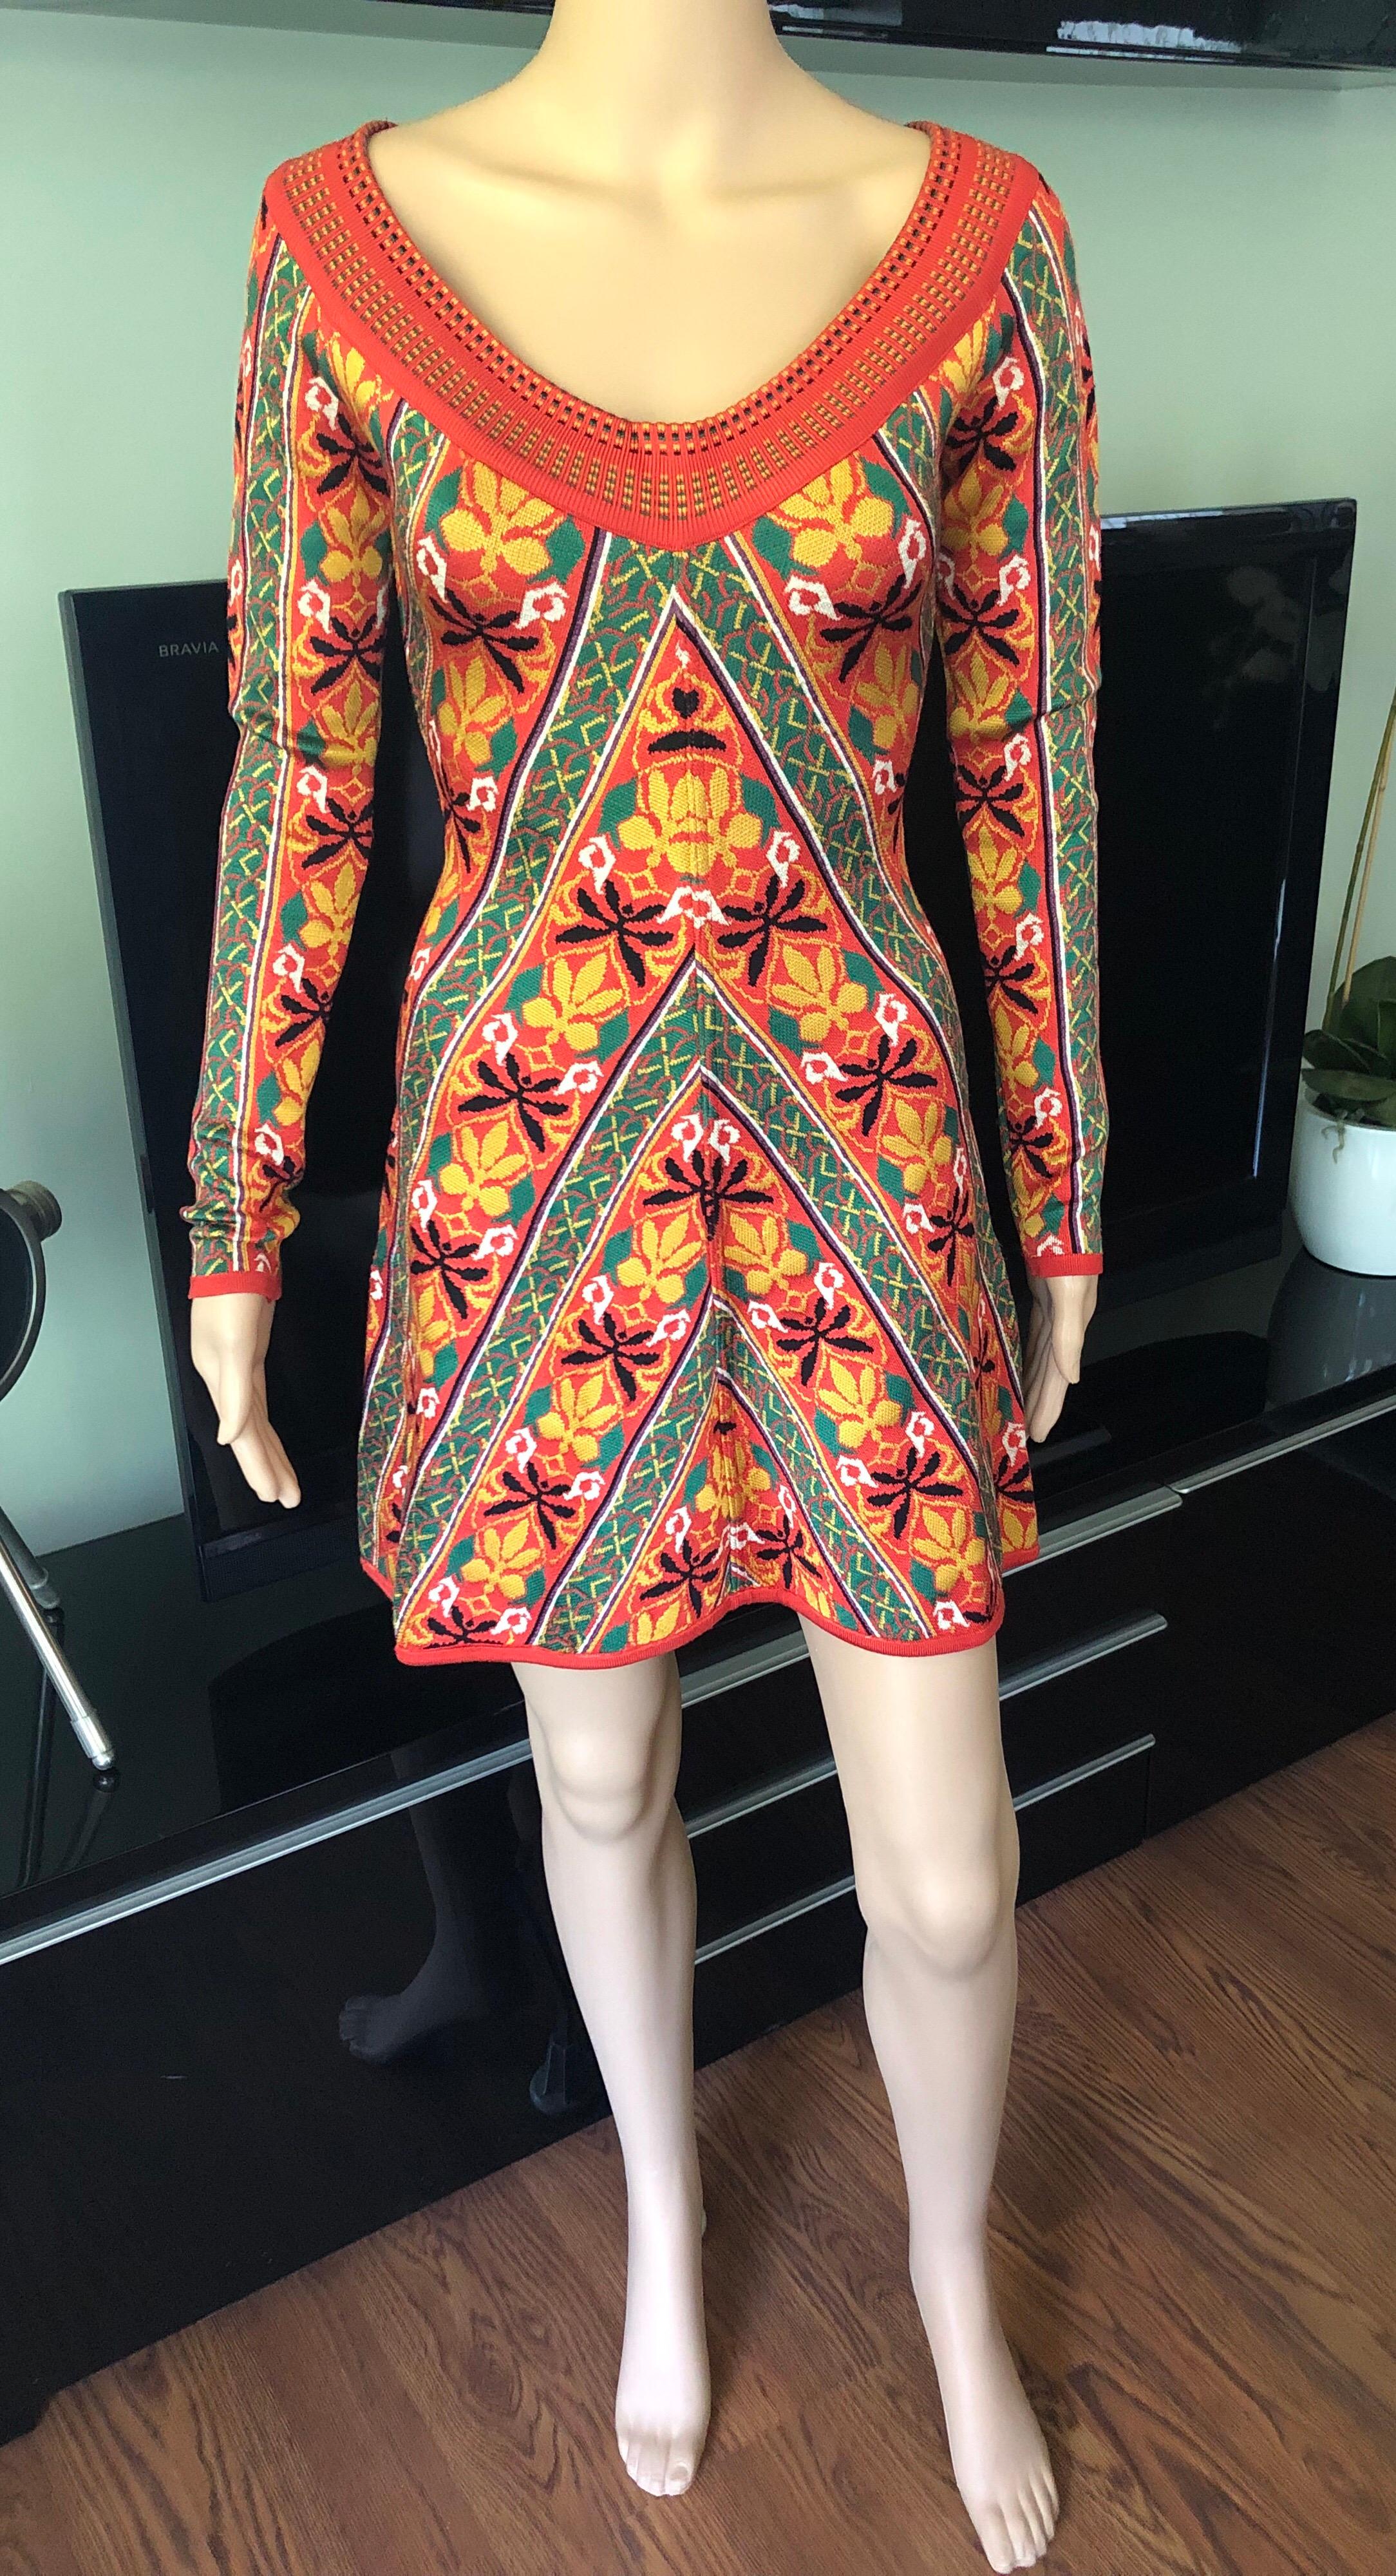 Azzedine Alaia F/W 1990 Vintage Abstract Floral Print Knit Dress Size M

Orange and multicolor vintage Alaia long sleeve mini heavy knit dress with abstract print throughout and scoop neckline.
